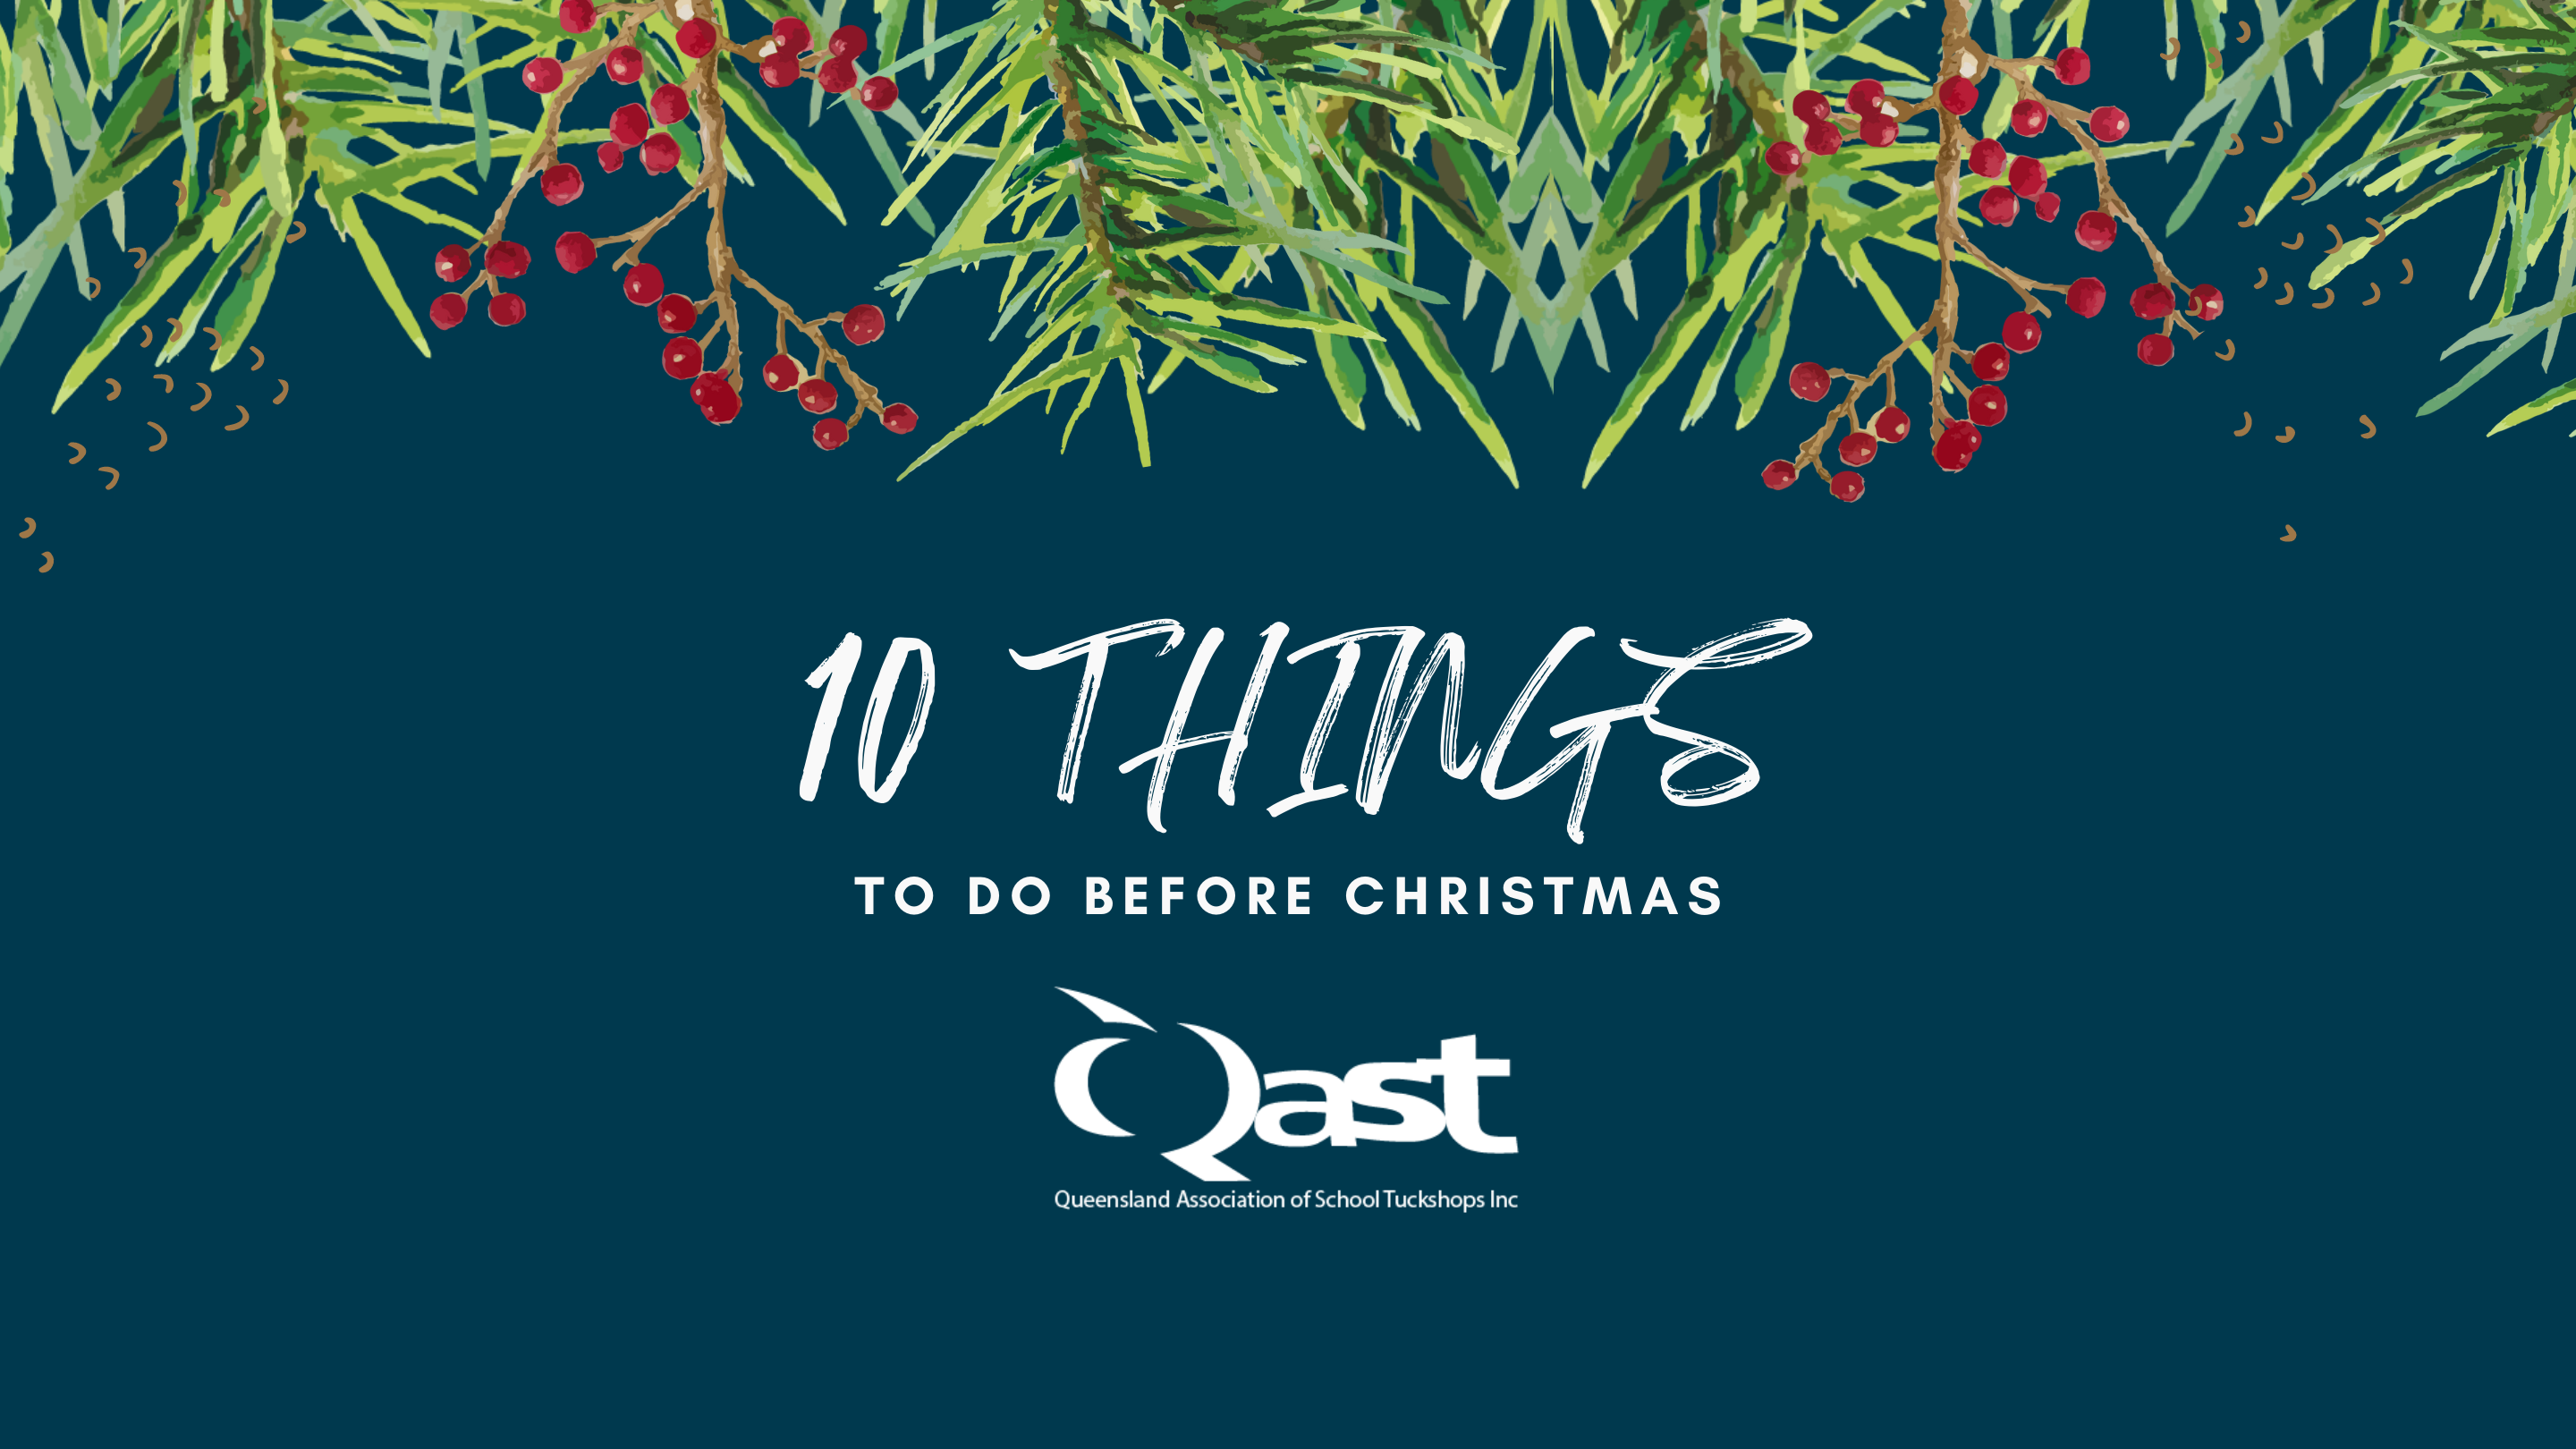 10 Things to do before Christmas